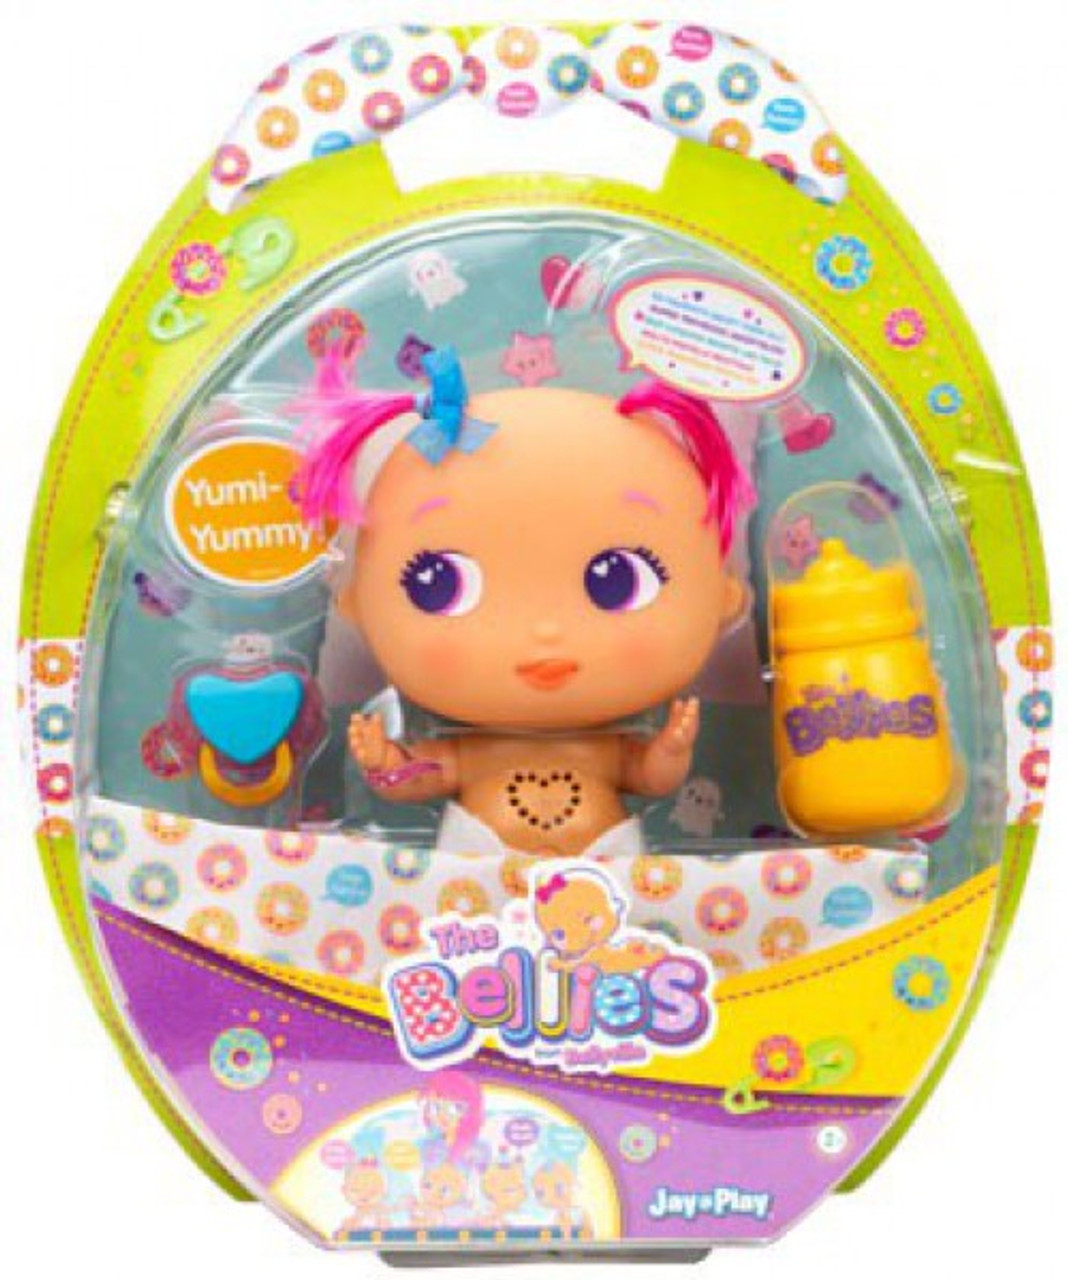 The Bellies Yumi Yummy Doll Damaged Package Jay At Play Toywiz - bobby kirby playz roblox youtube